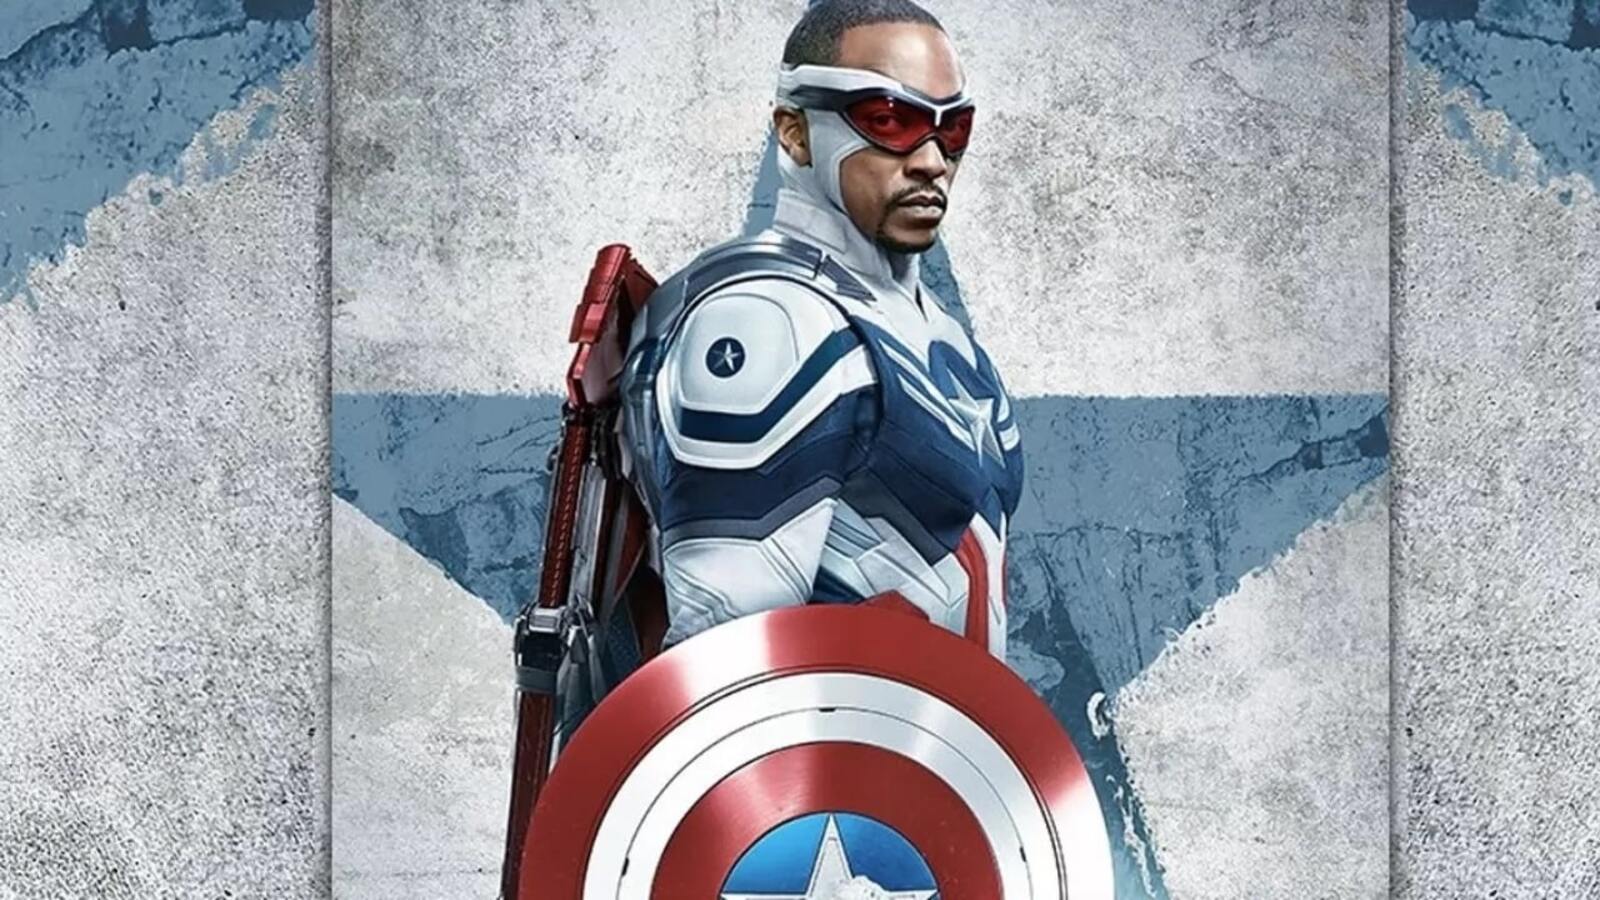 Captain America 4, Anthony Mackie Shares Set Photo With Harrison Ford;  the Marvel movie changes its title